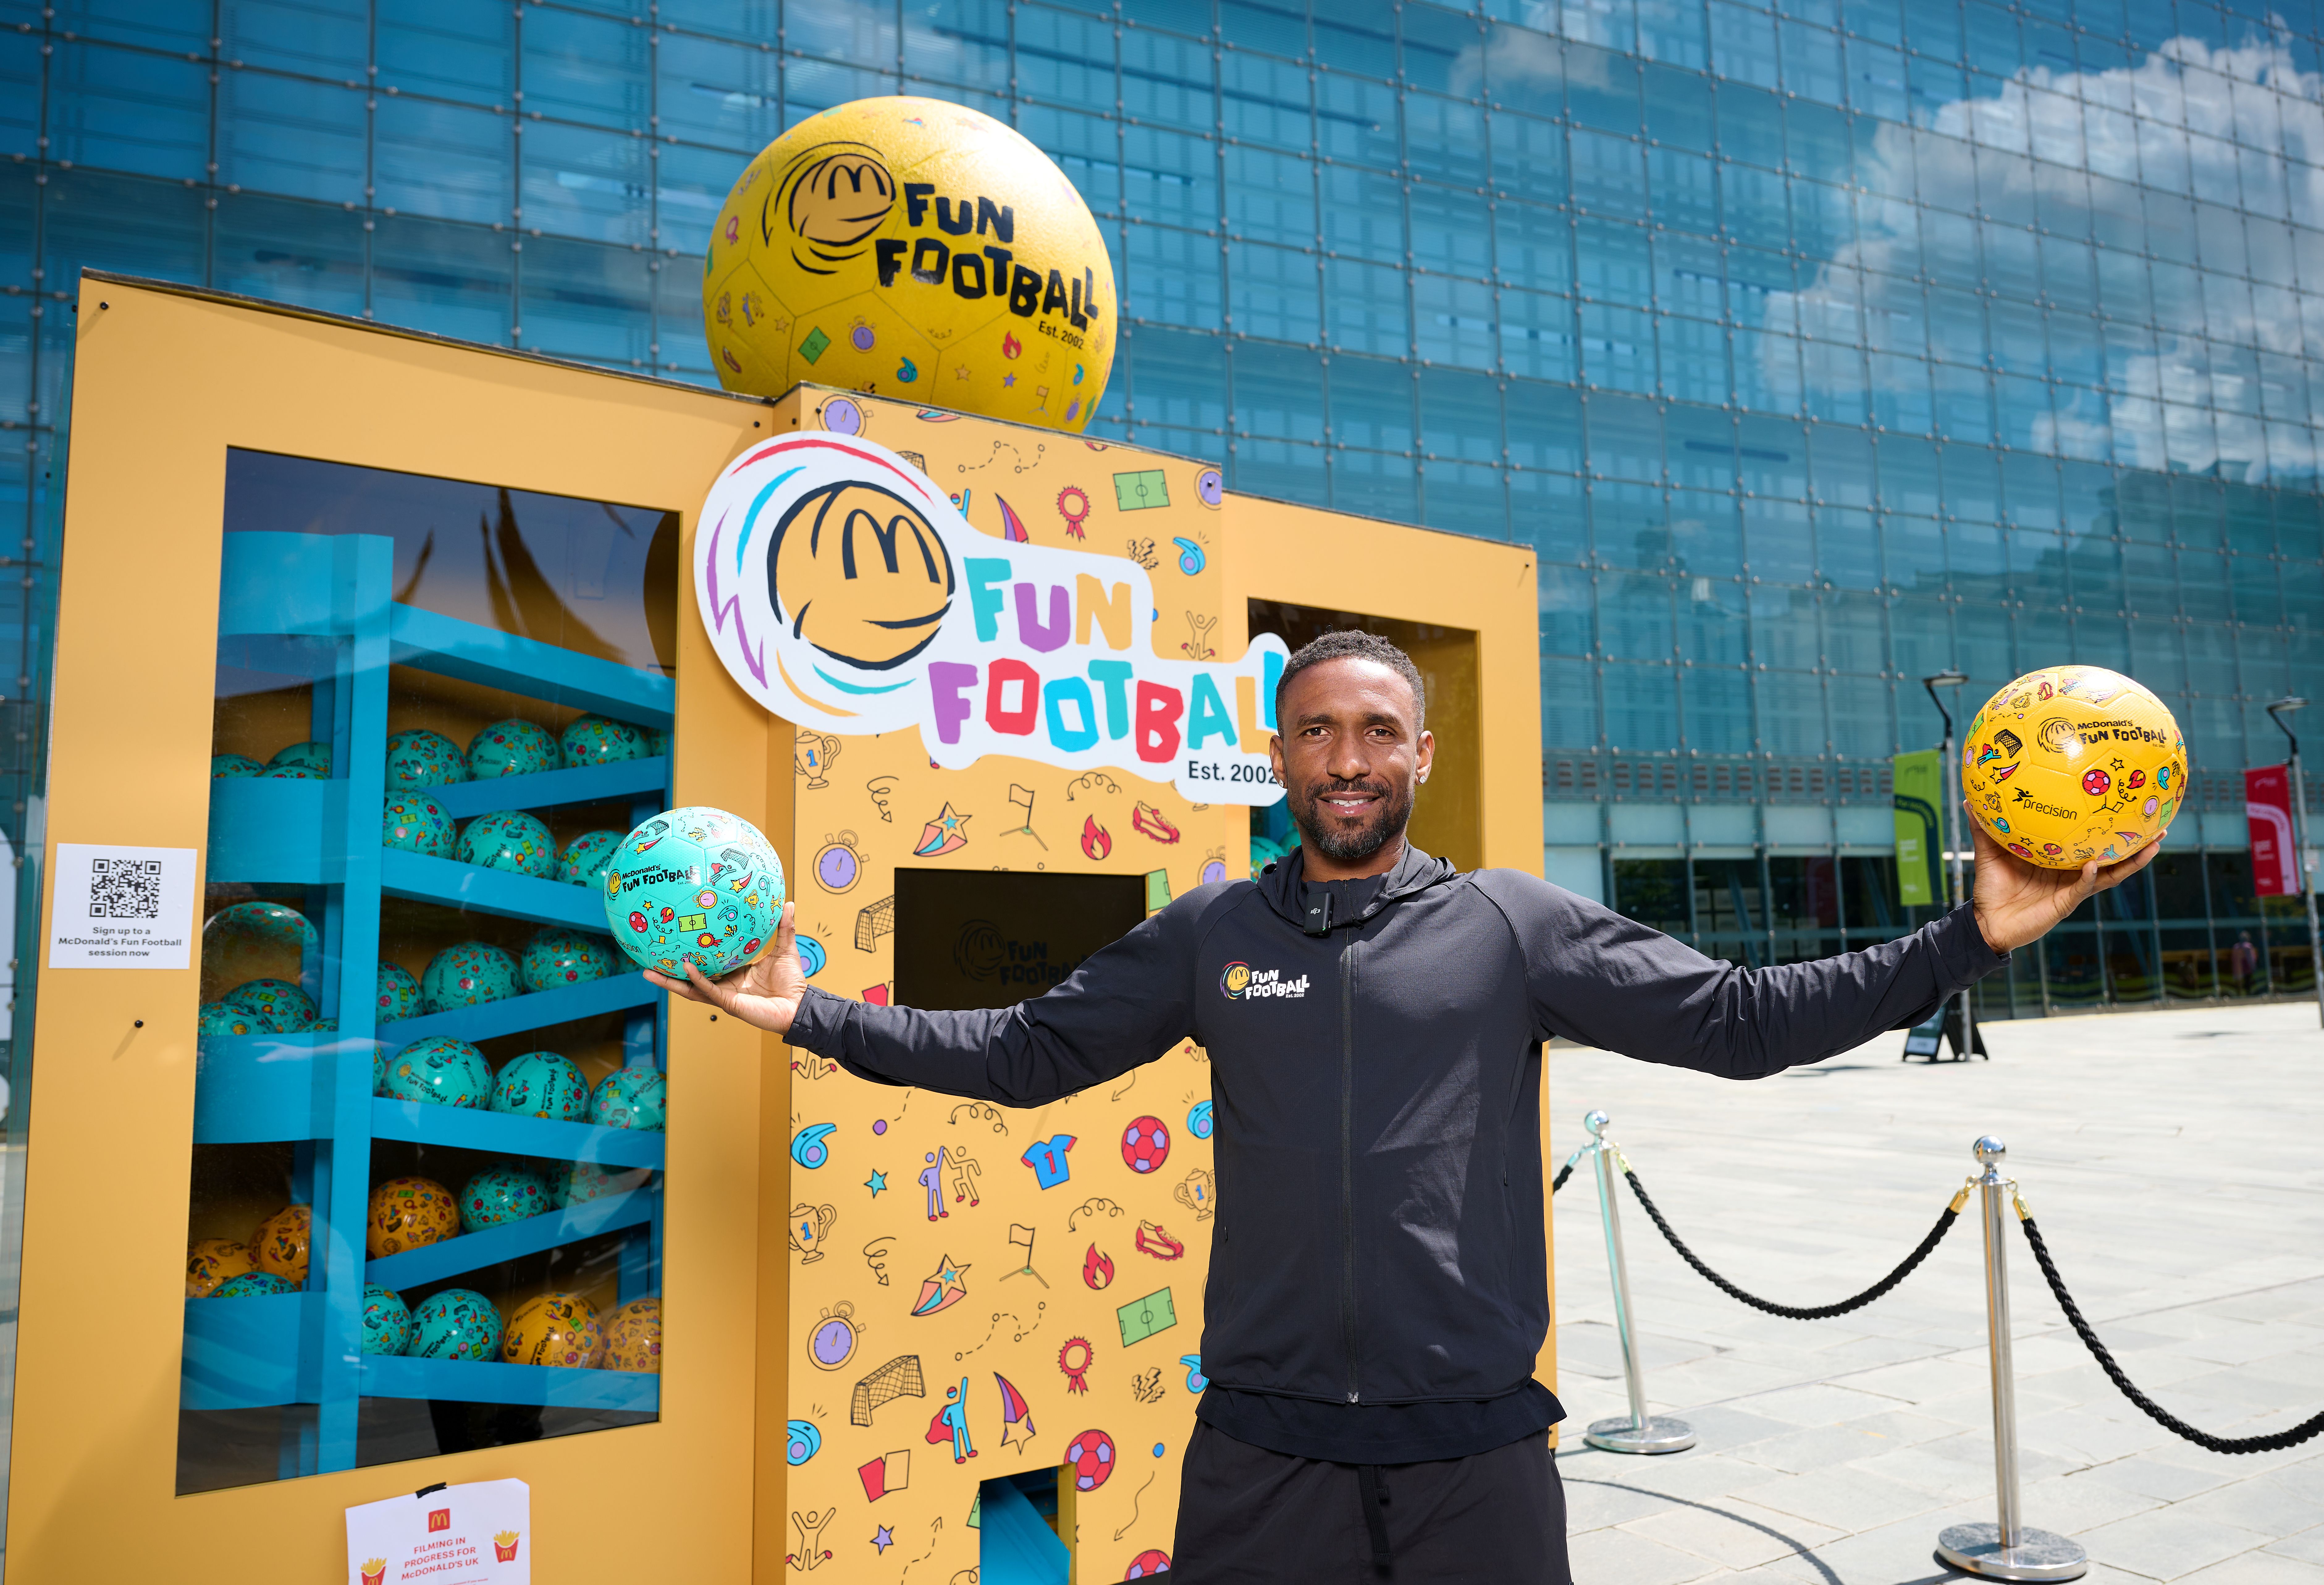 Jermain Defoe at a McDonald’s Fun Football event outside the National football Museum in Manchester